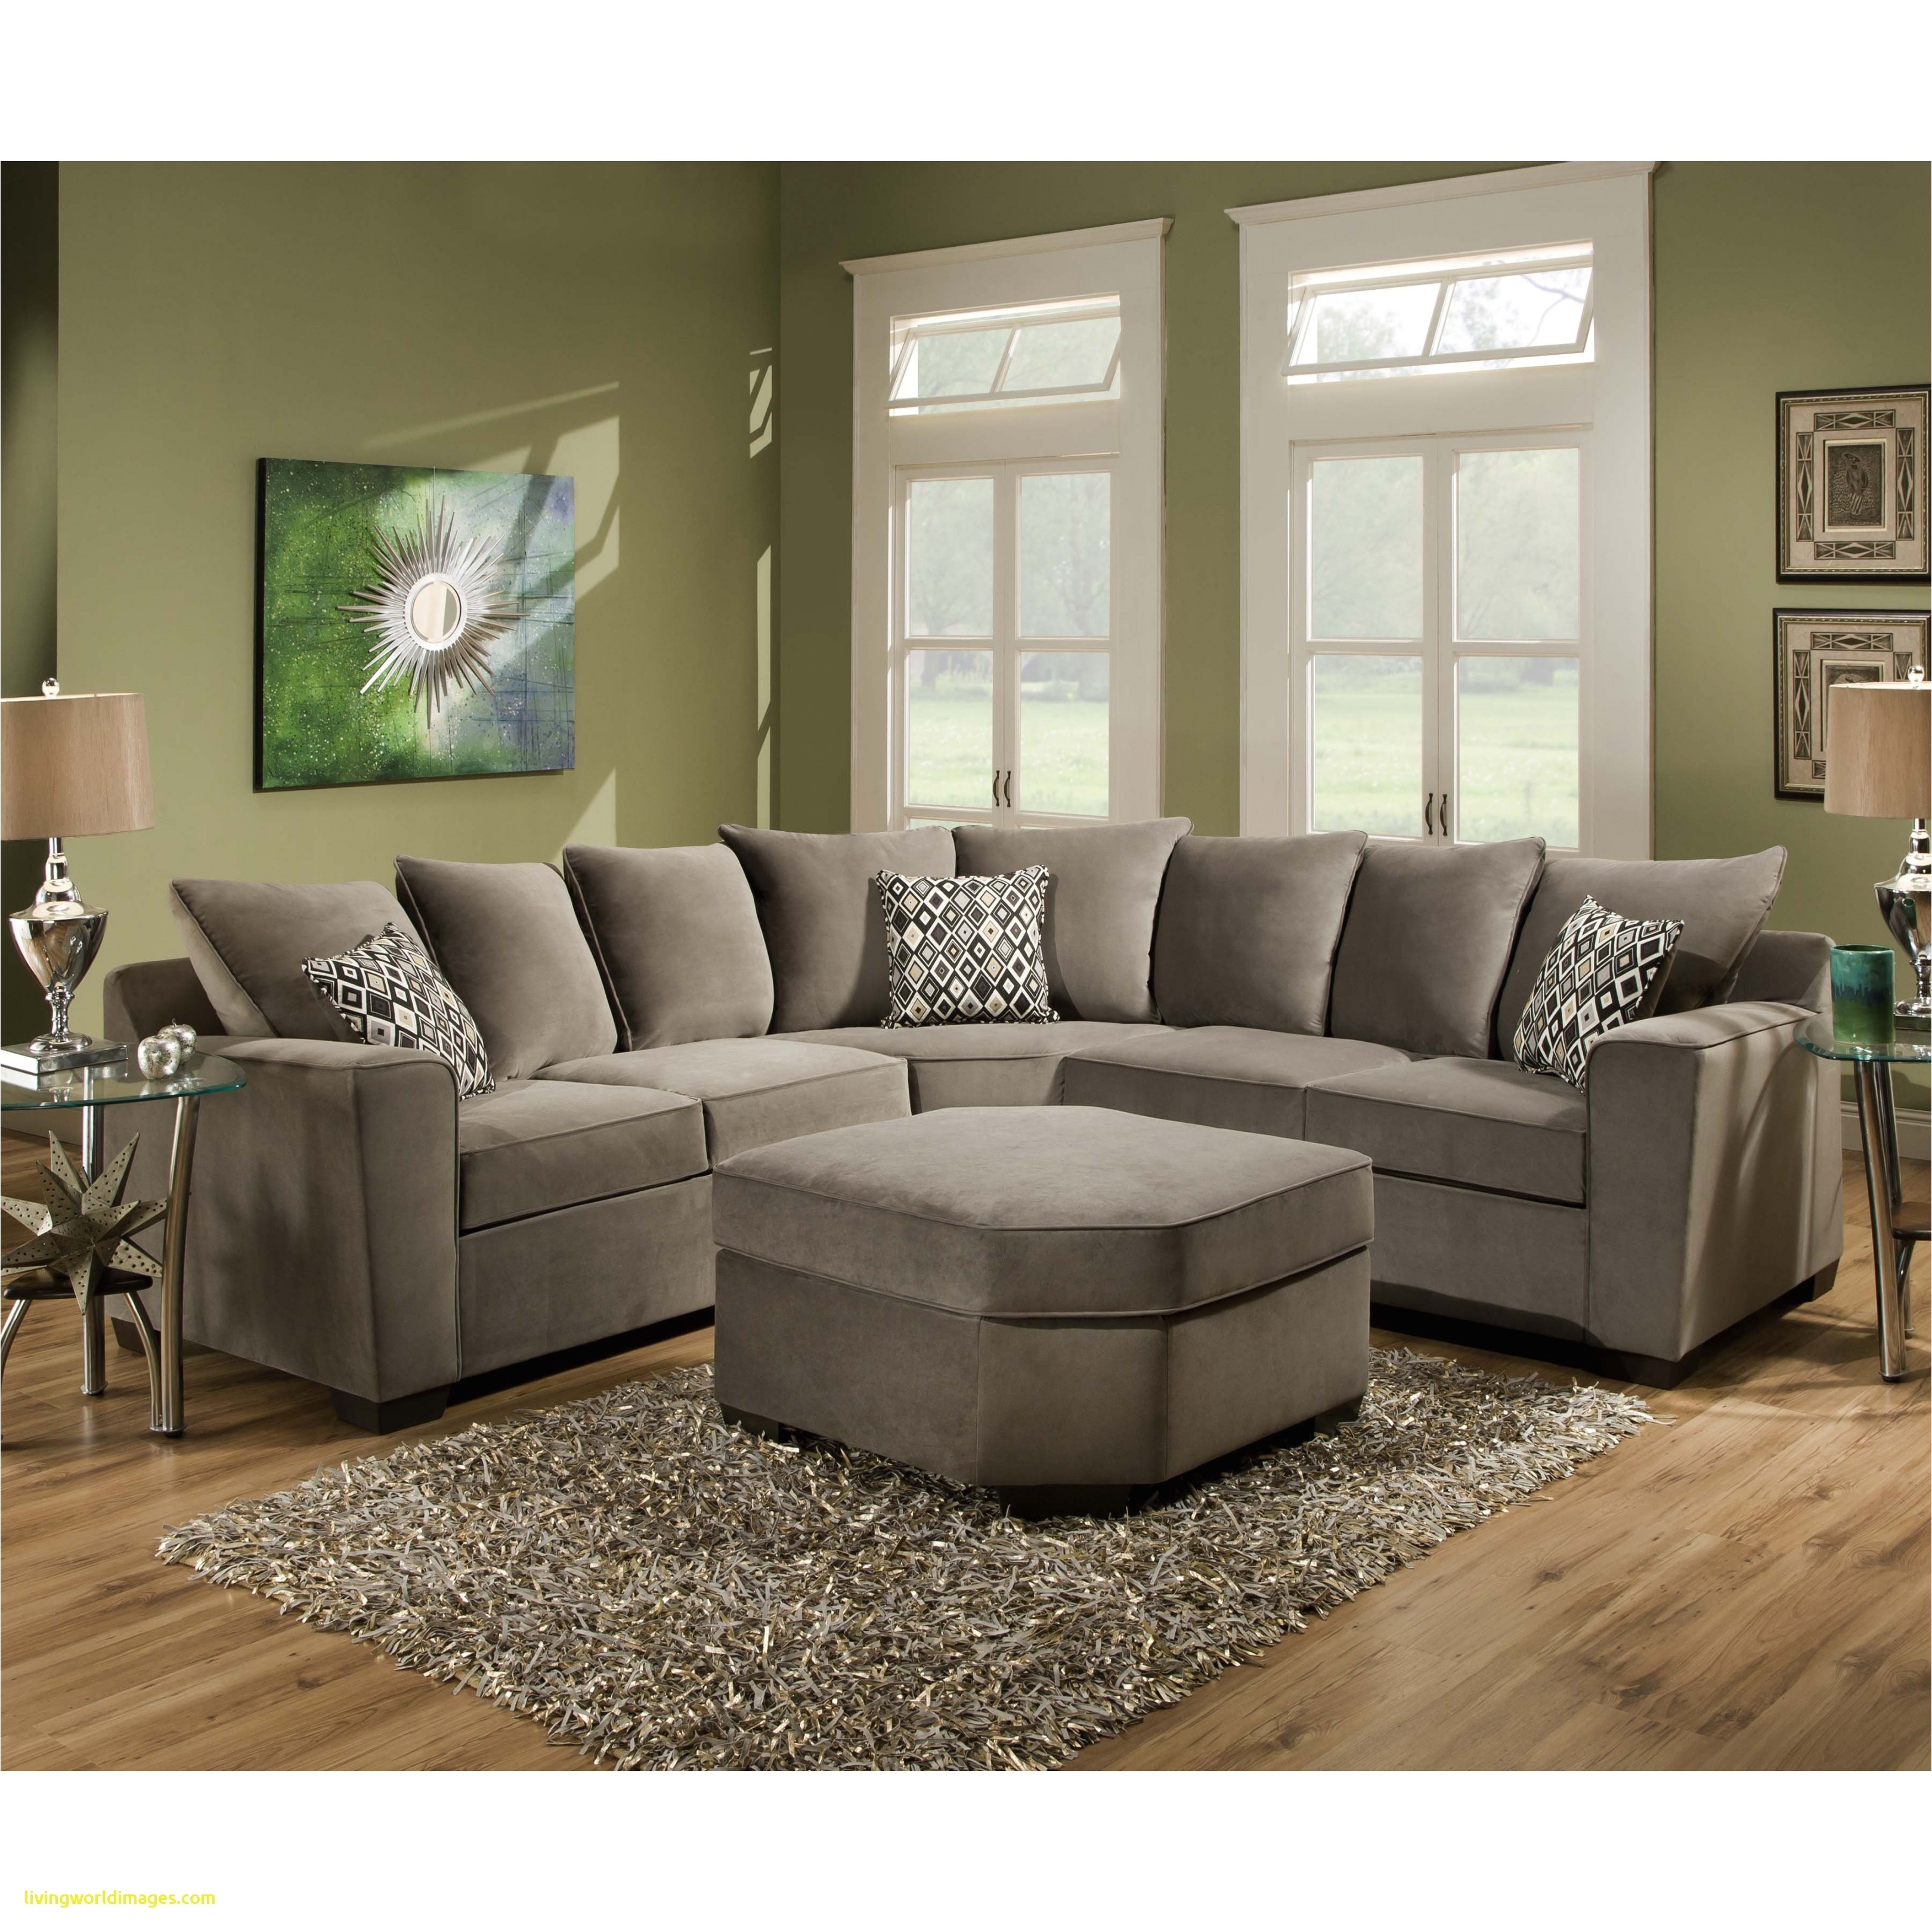 full size of sofa sofa covers at big lots sleepers furniture tables beds sale sectional